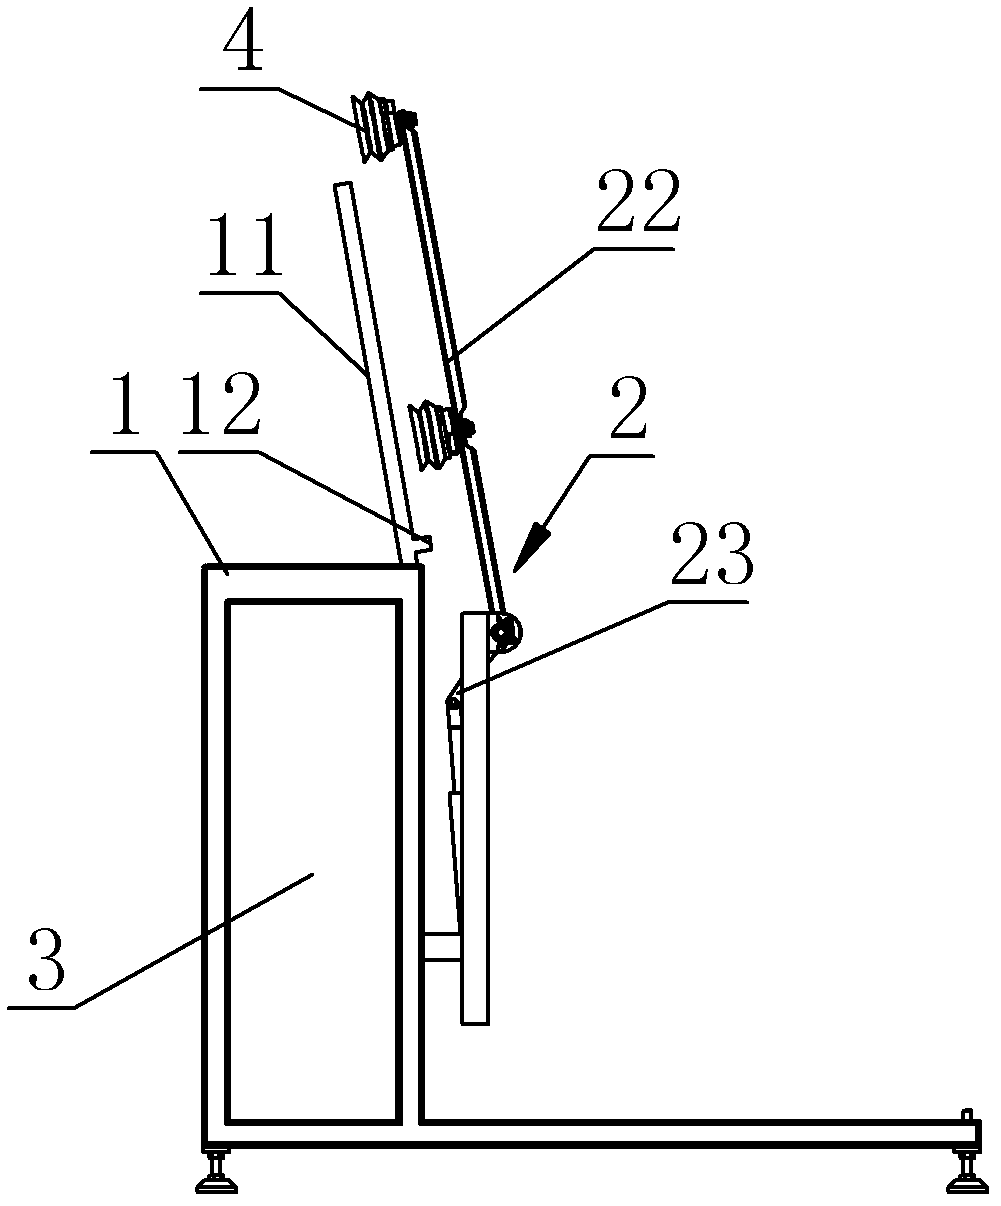 On-line appearance detecting machine after lamination of solar cell panels